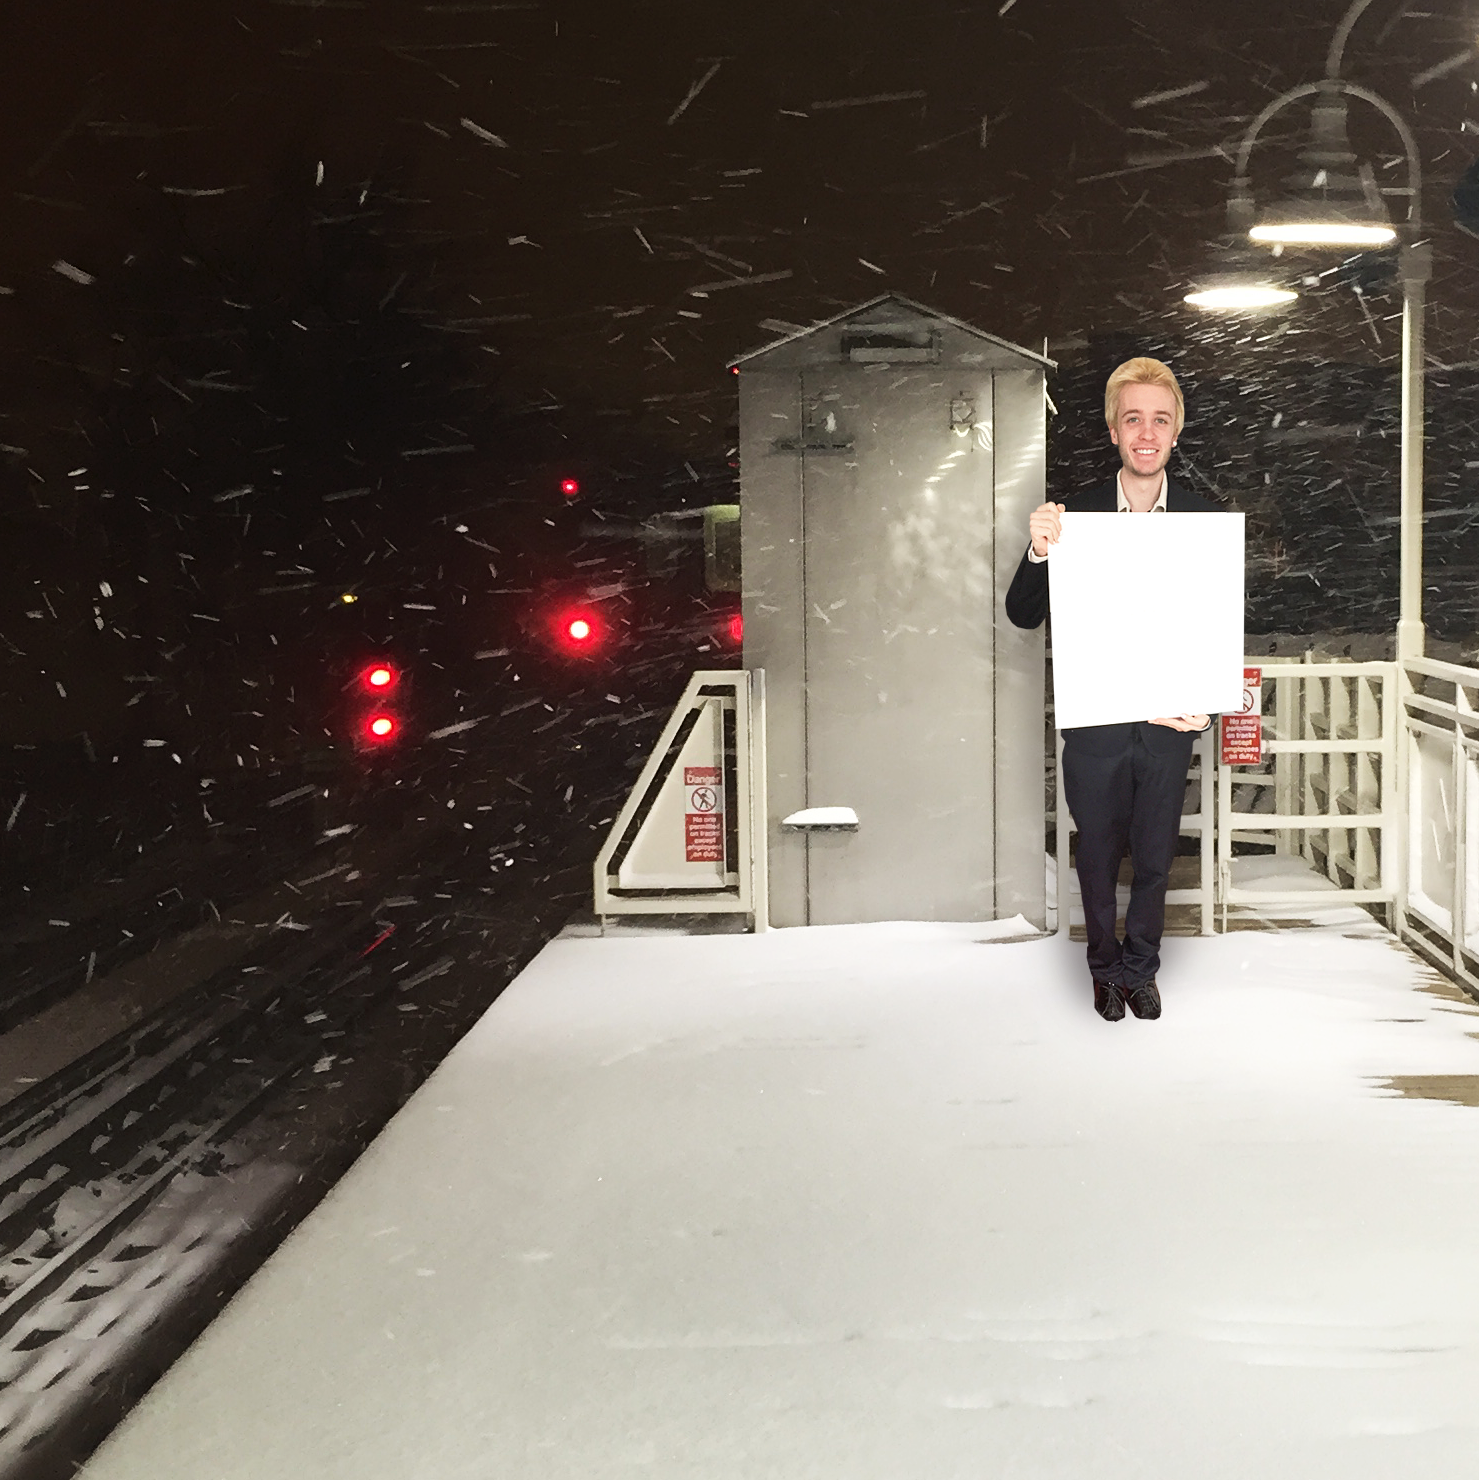 Butler holding a blank sign on a train platform in the snow